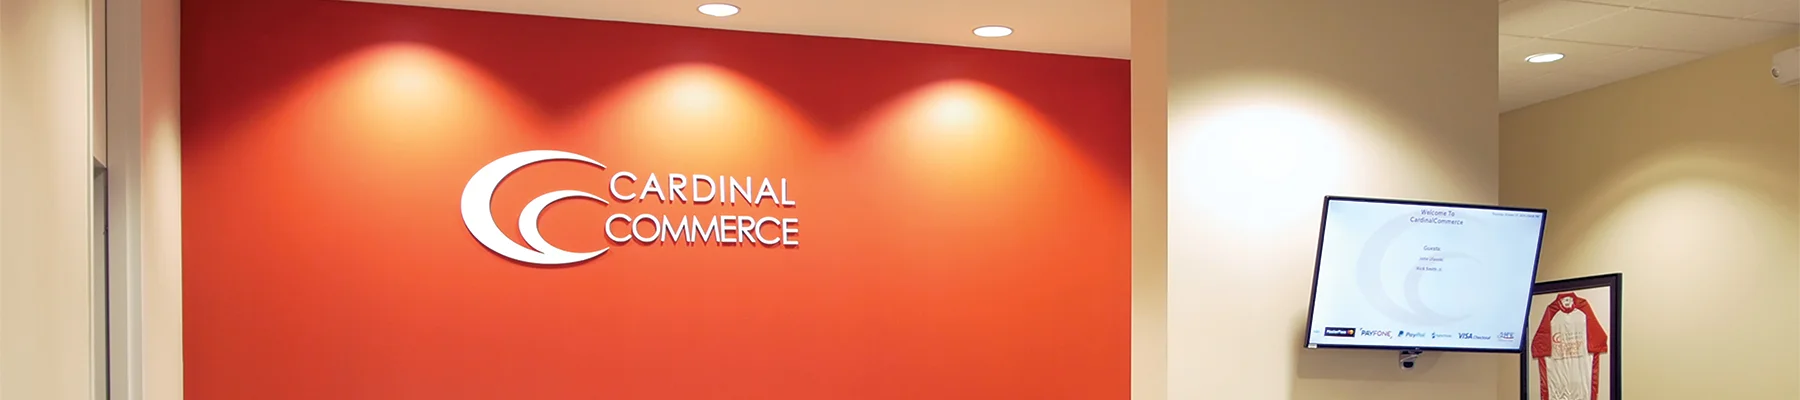 Cardinal Commerce logo on an orange wall with lights